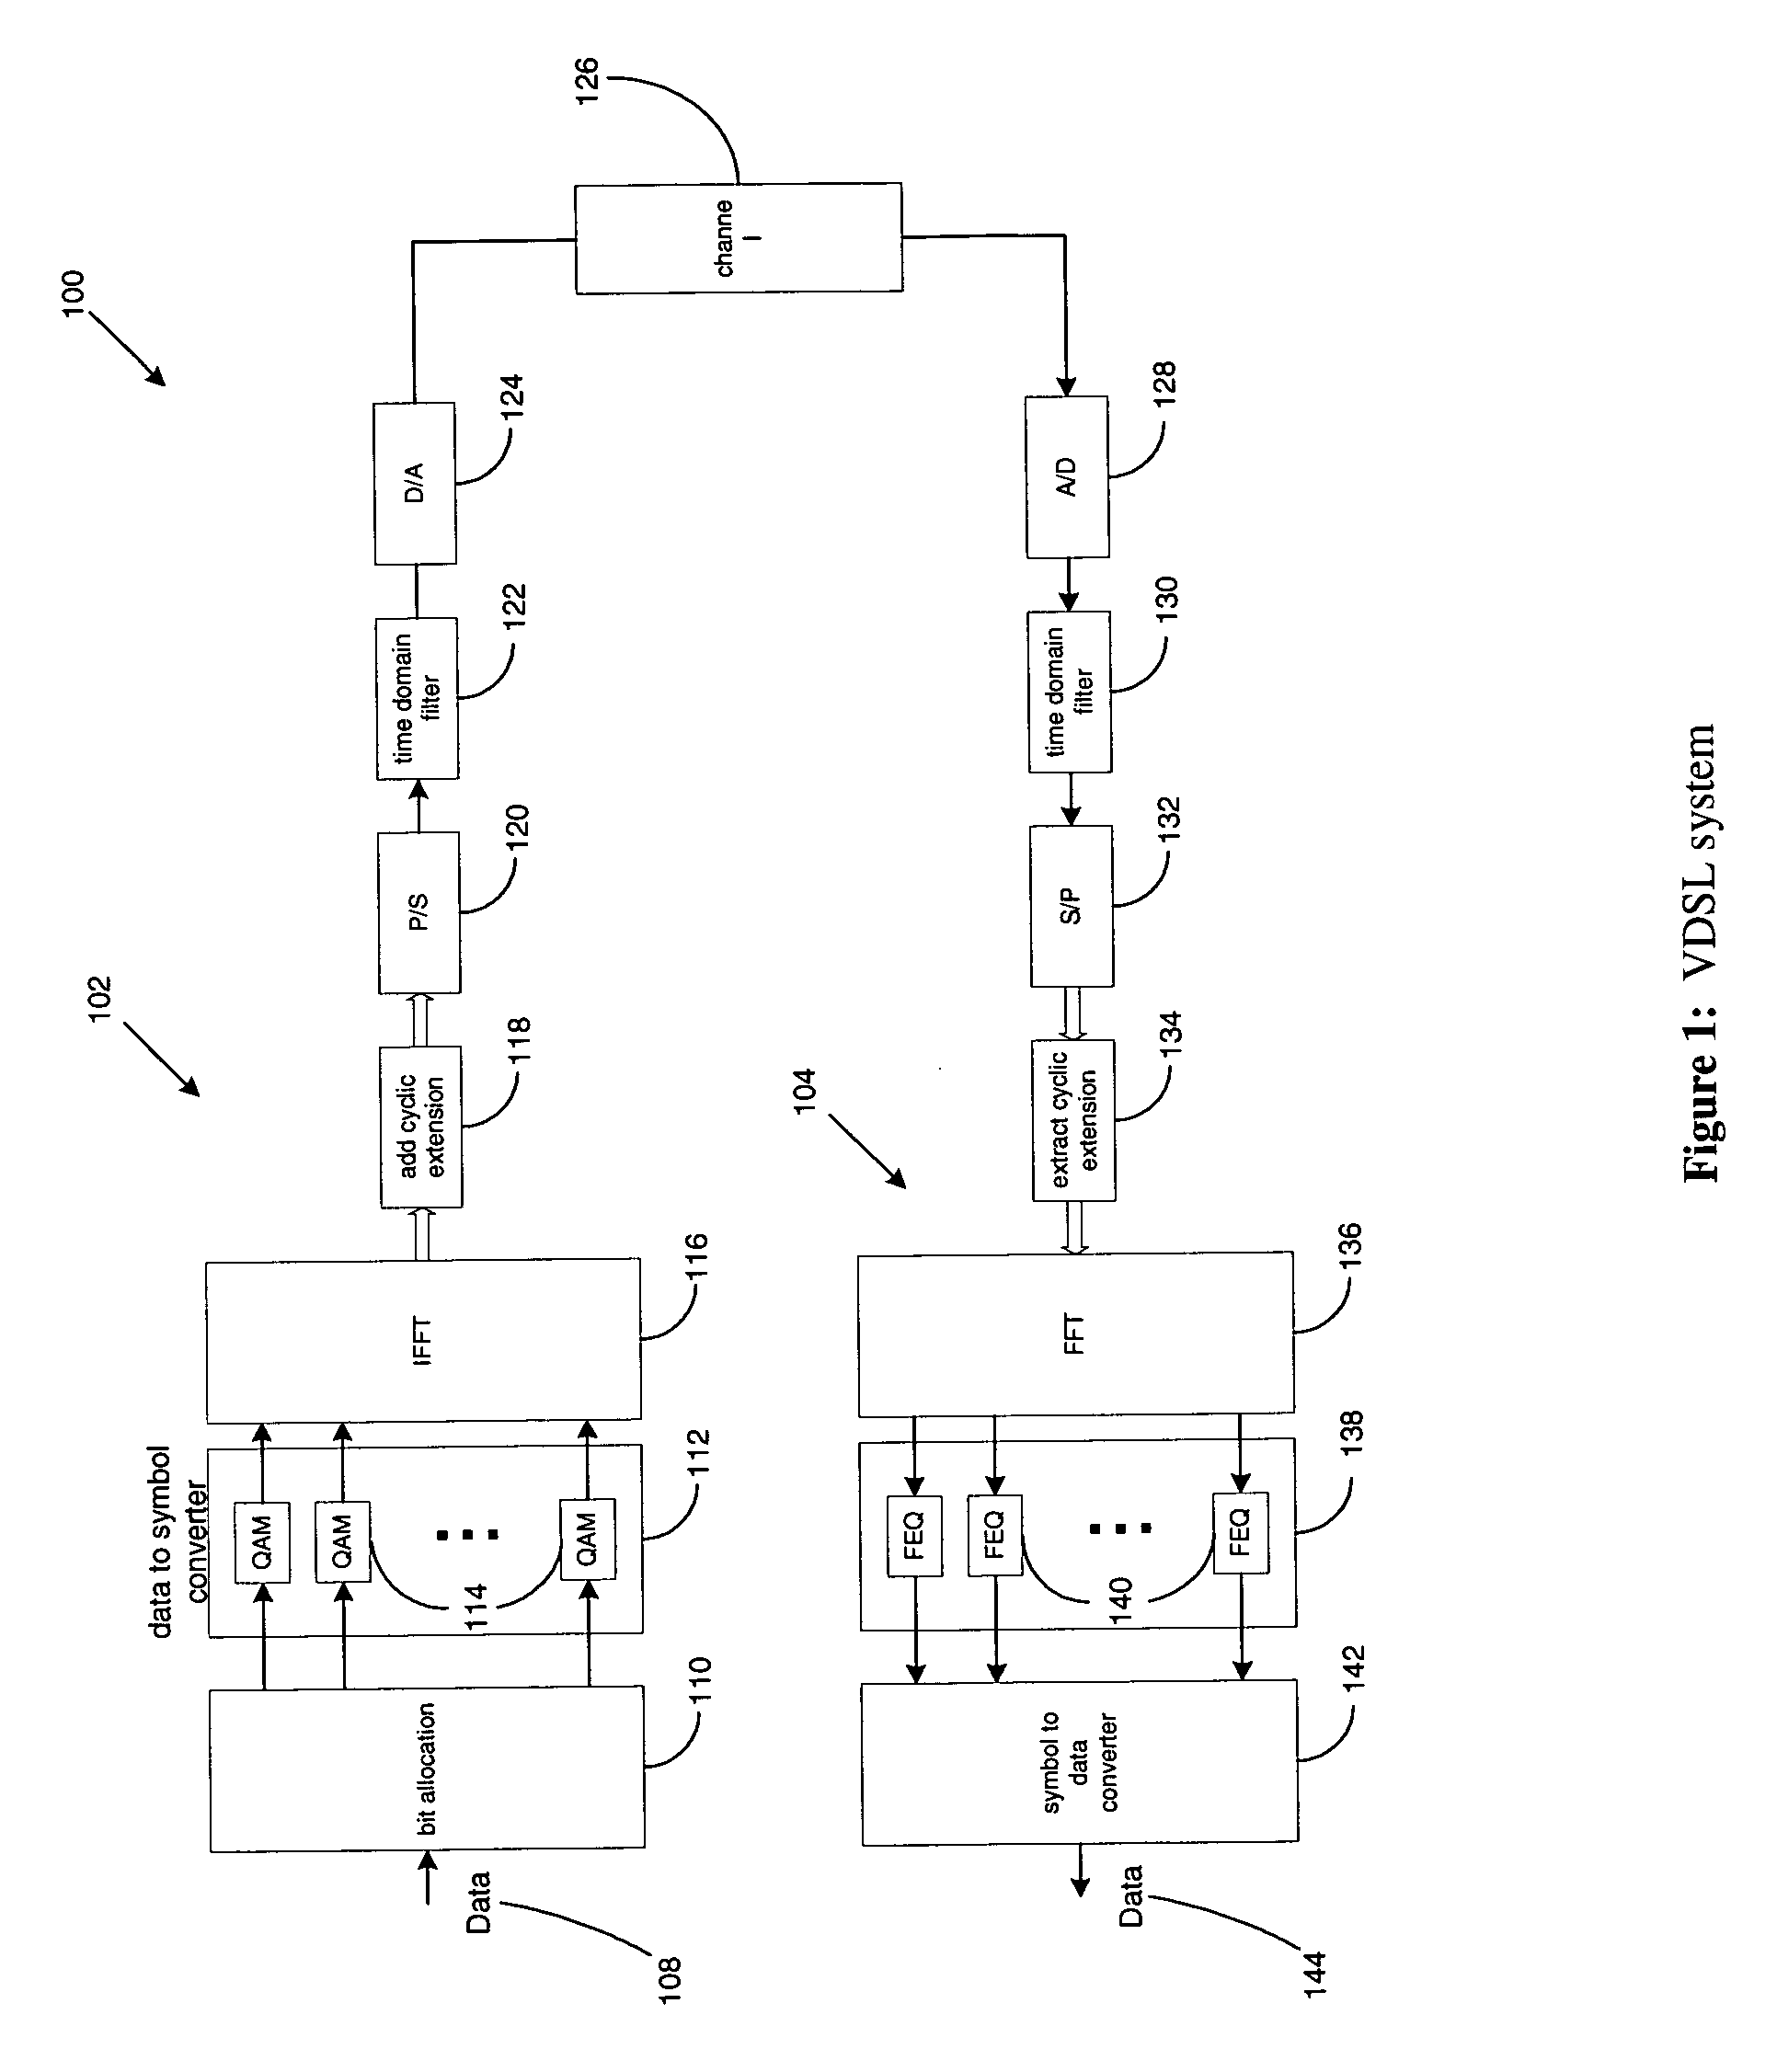 Systems and methods for adaptive VDSL with variable sampling frequency and time-domain equalizer